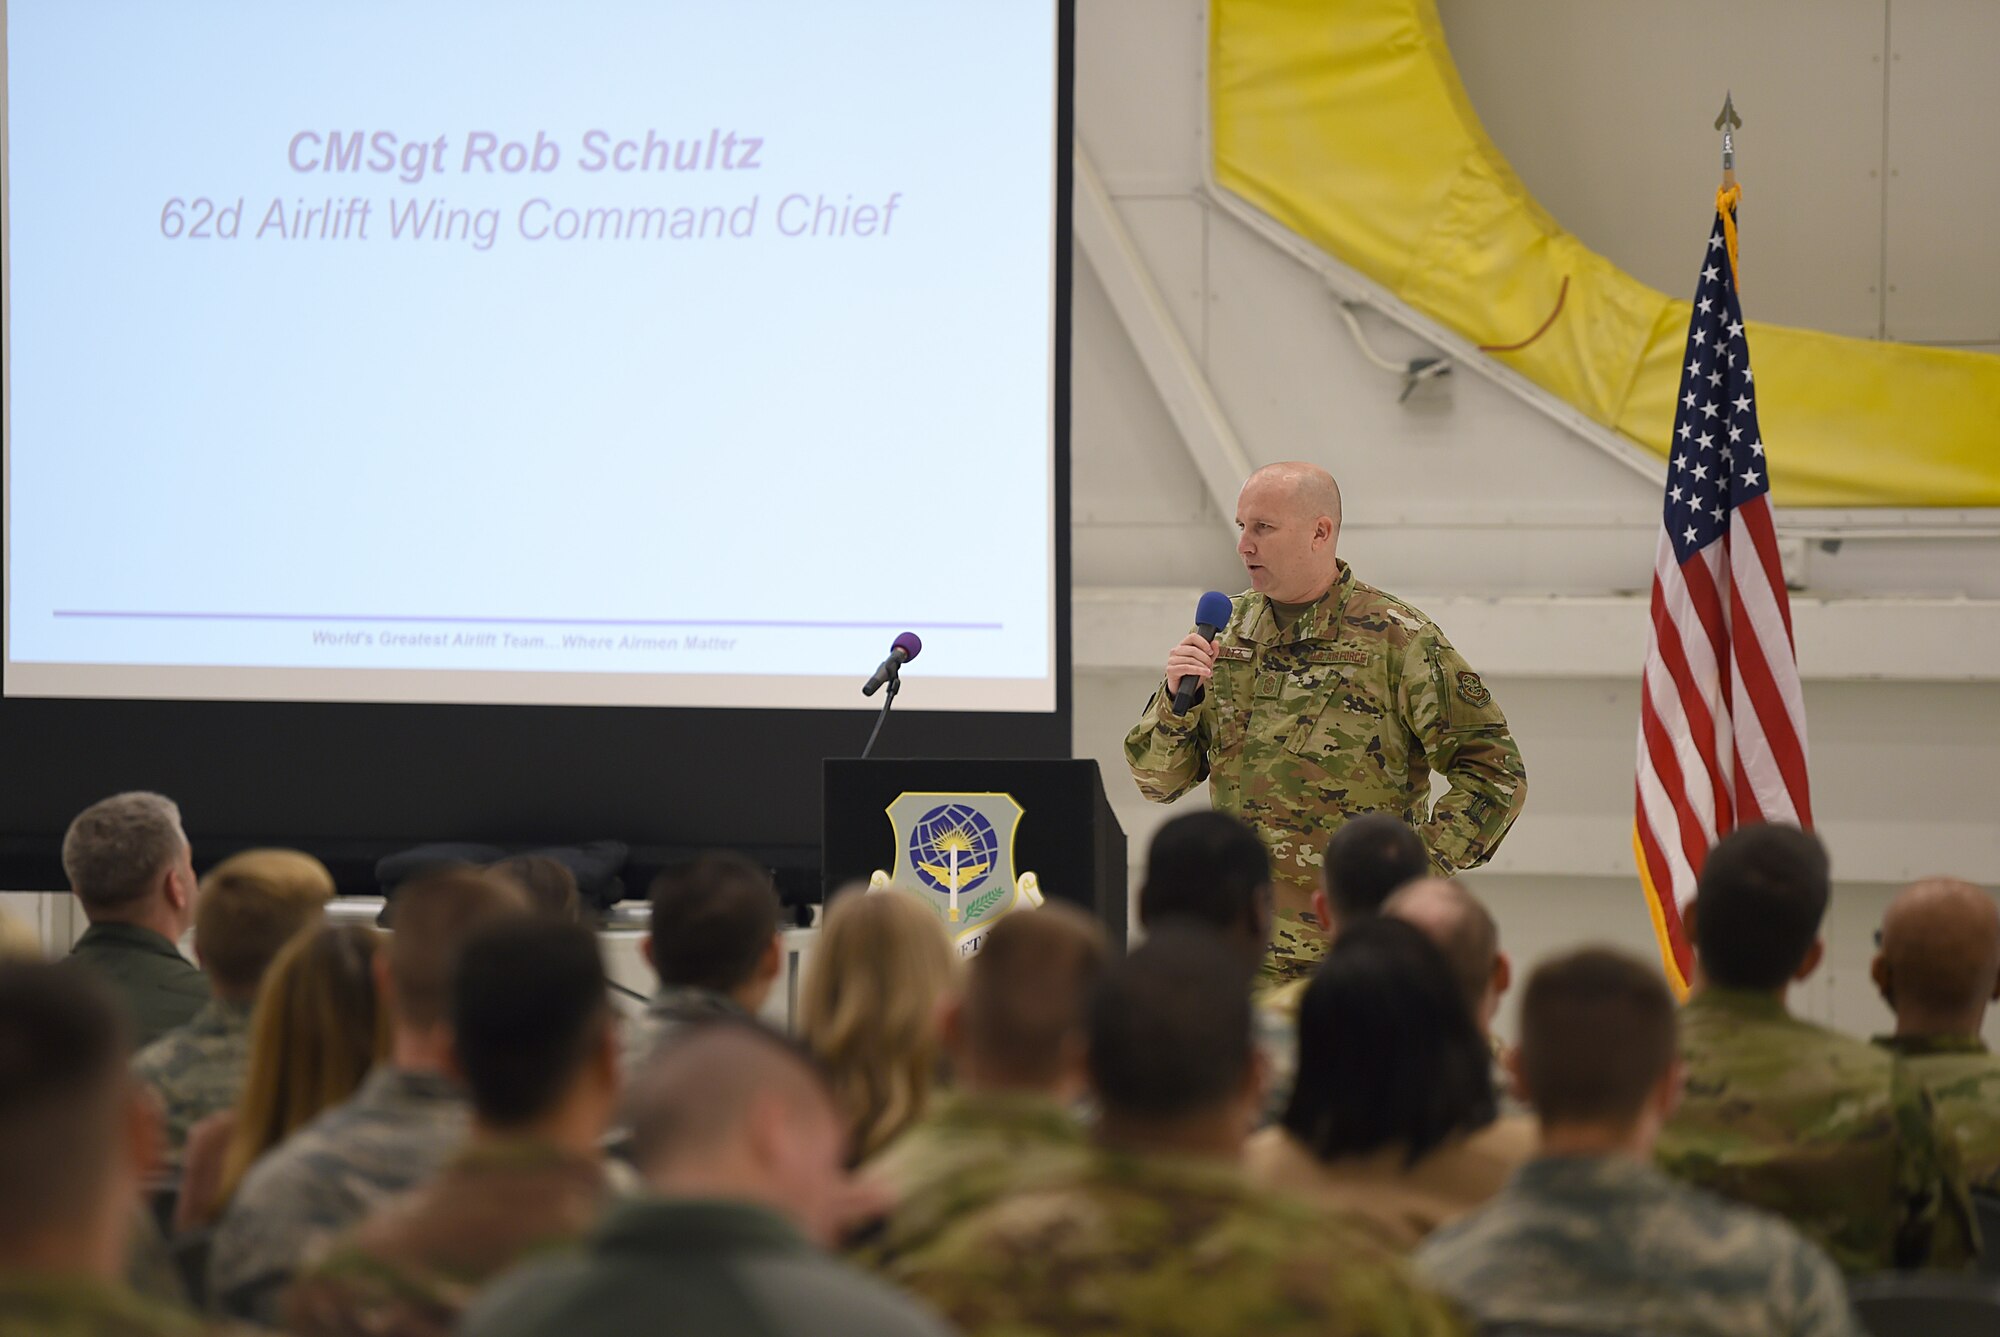 Chief Master Sgt. Rob Schultz, 62nd Airlift Wing command chief, address members of the 62nd Airlift Wing during an all-call on Joint Base Lewis-McChord, Wash., Nov. 15, 2019. This was the first time since filling the position of command chief that he publicly addressed the wing en masse.